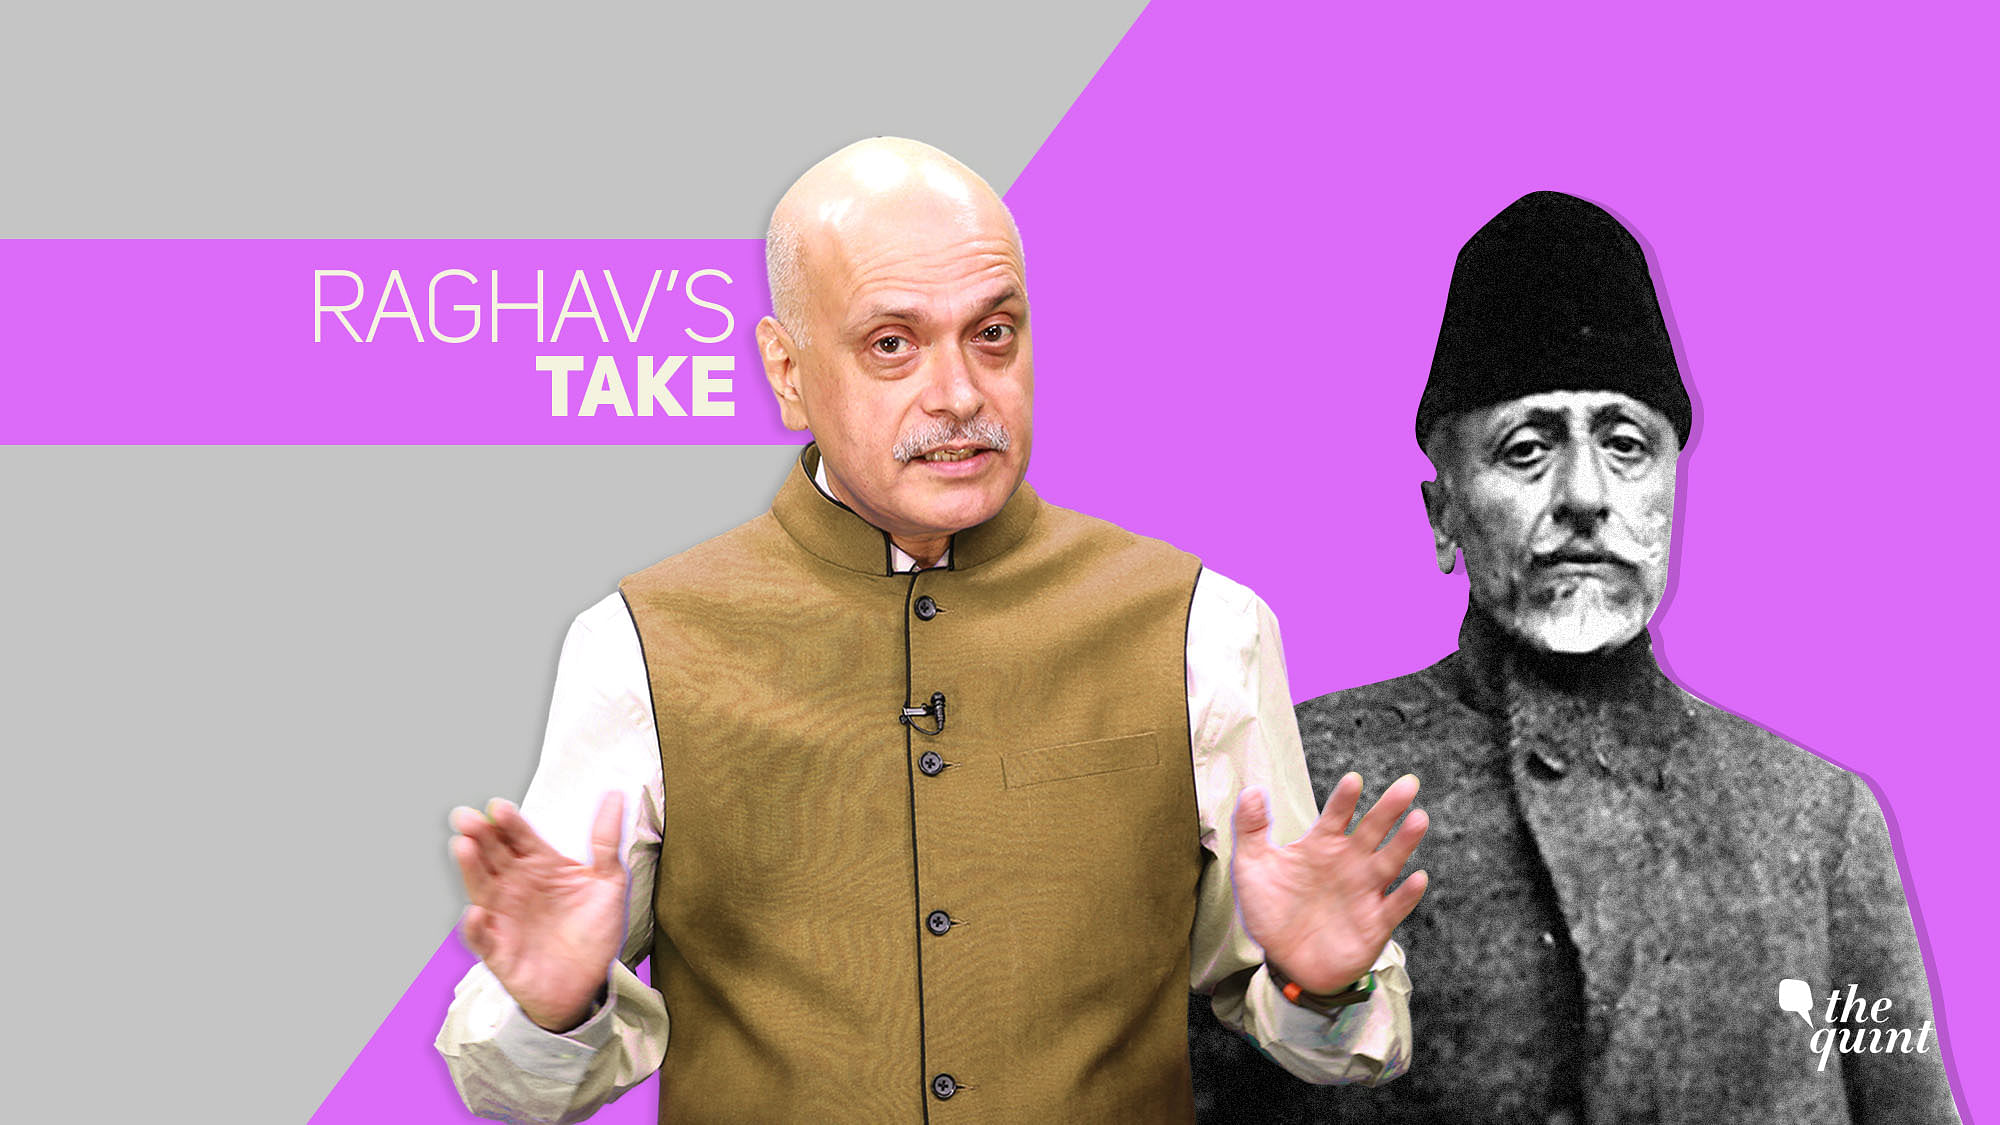 It’s such a pity that leaders like Maulana  Azad have faded from India’s political conscience.